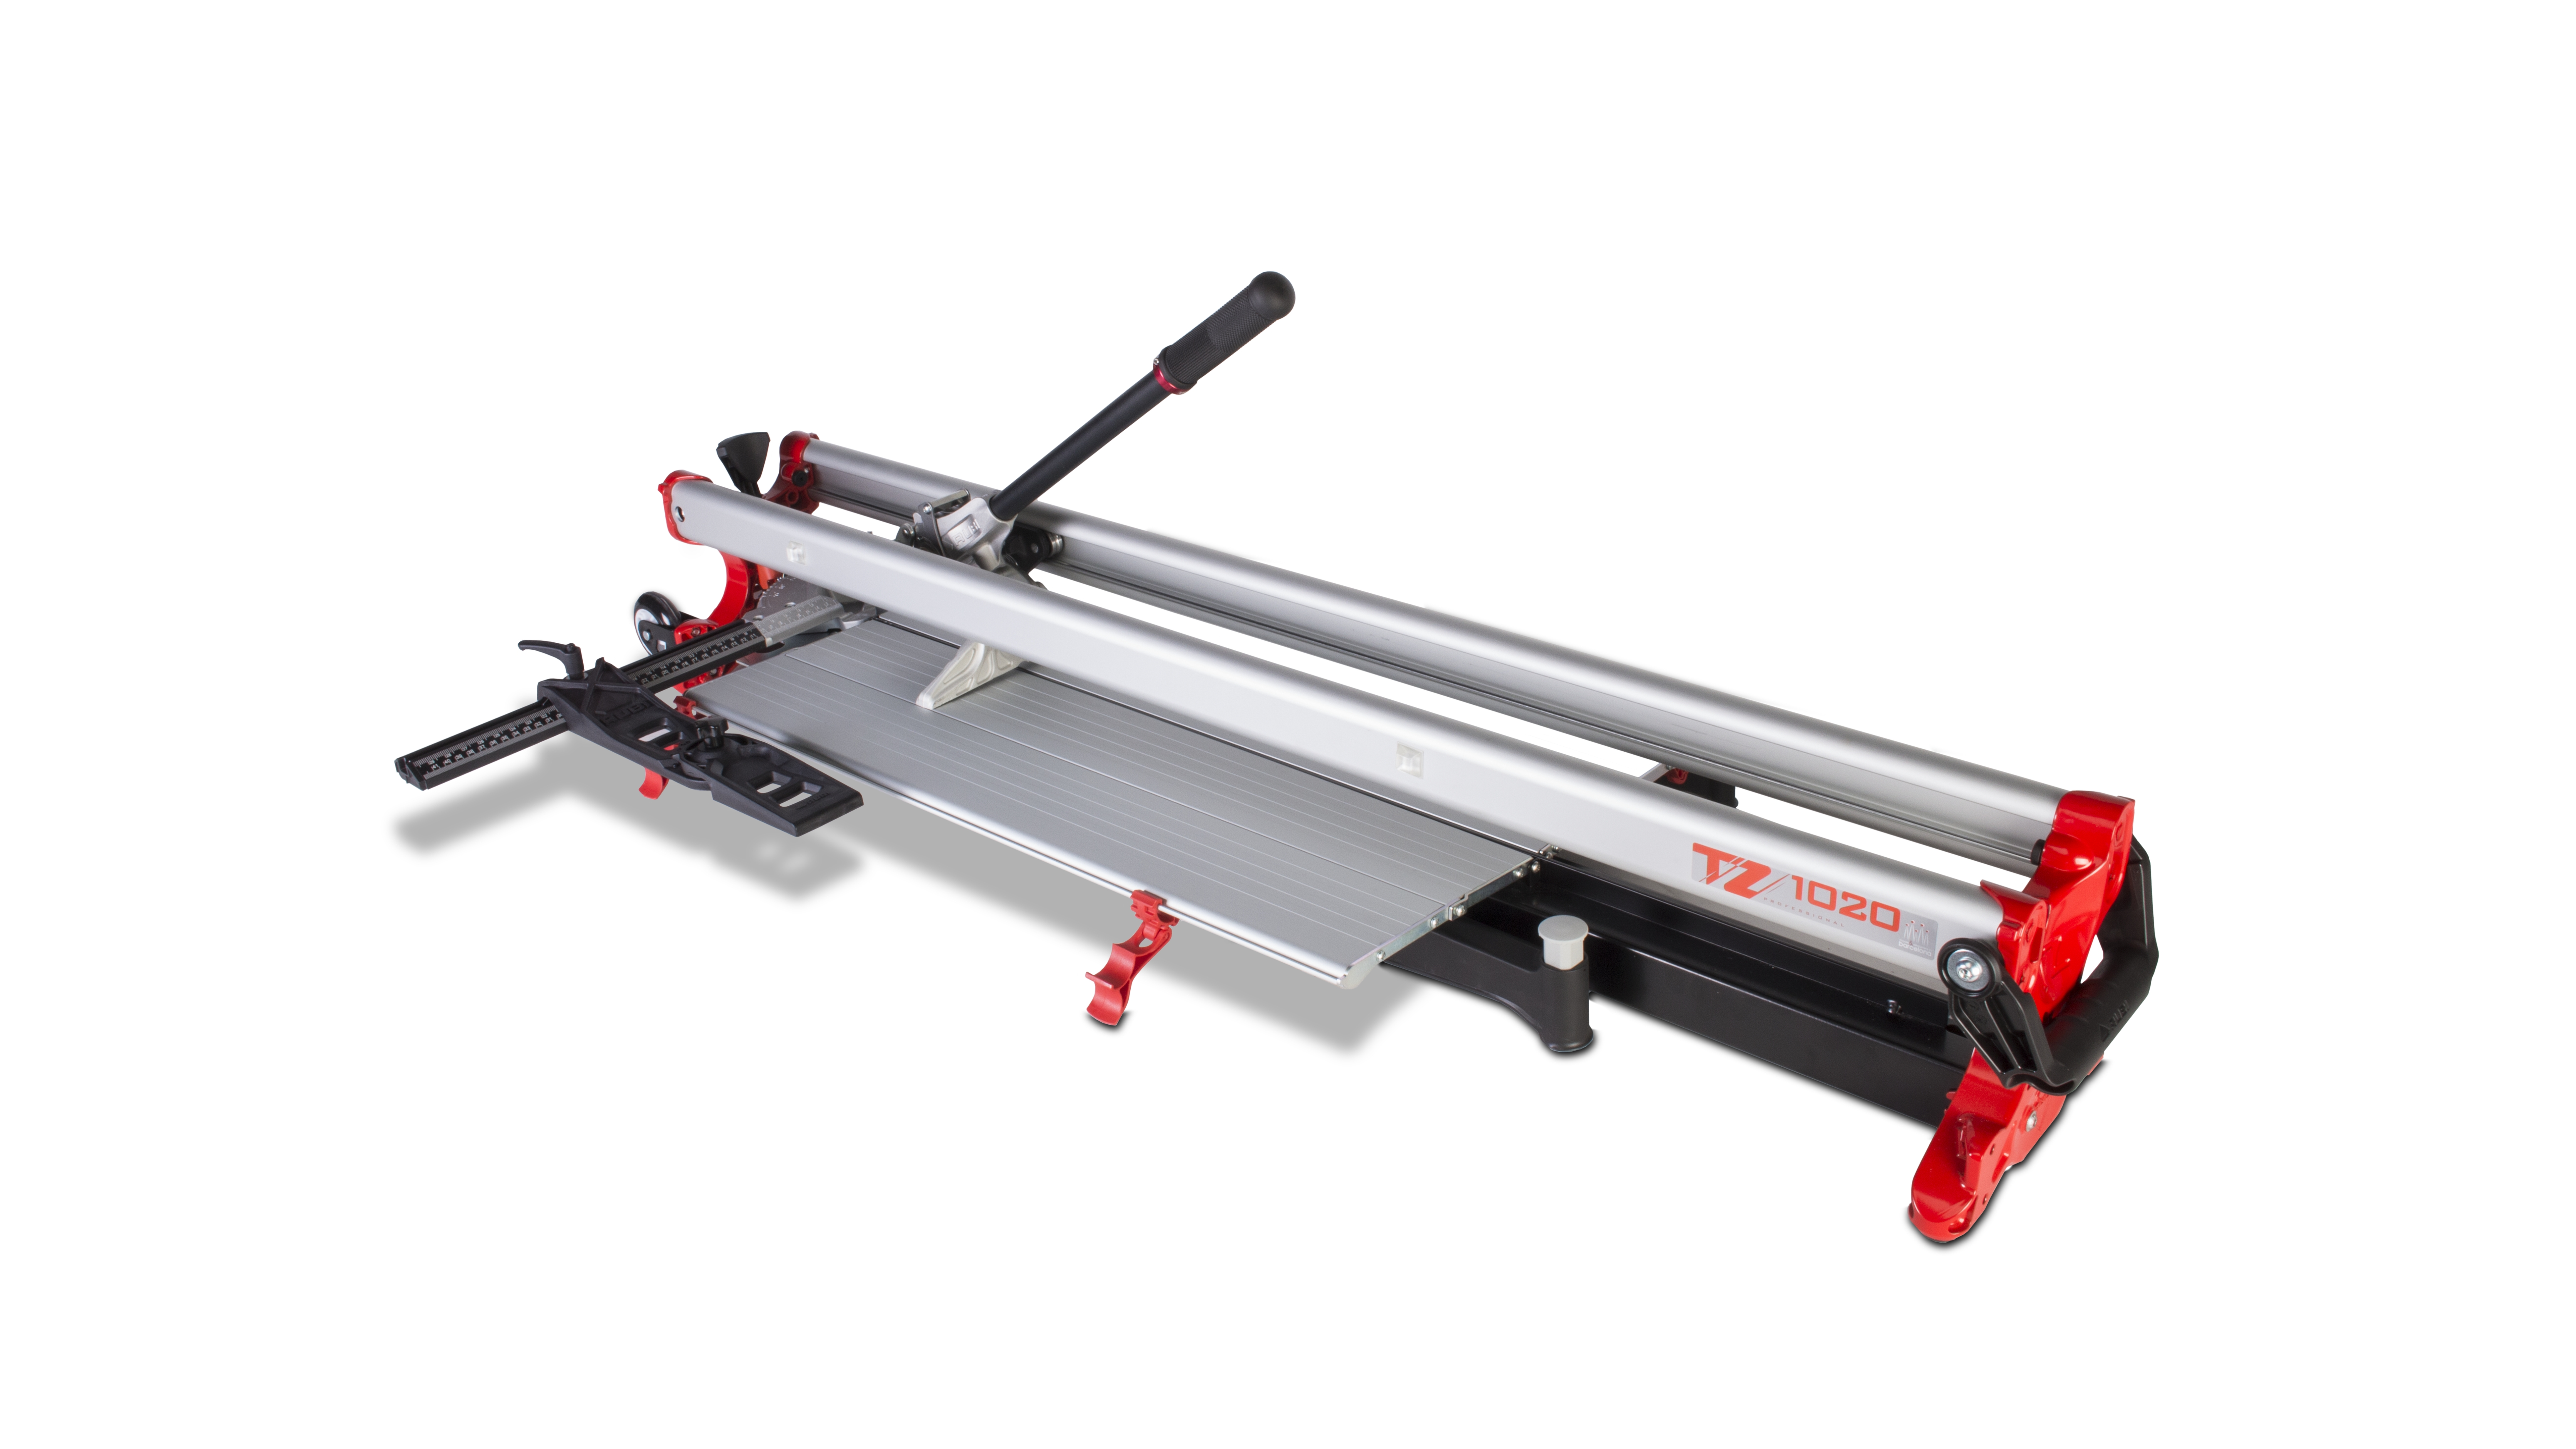 RUBI TZ-1020 40 Heavy-Duty Manual Tile Cutter w/Bag [No. TZ-1020] - $779.01  : Flooring Tools & Installation Supplies | jnsflooringandsupplies.com, The  Only Thing Better Than Our Selection Is Our Service